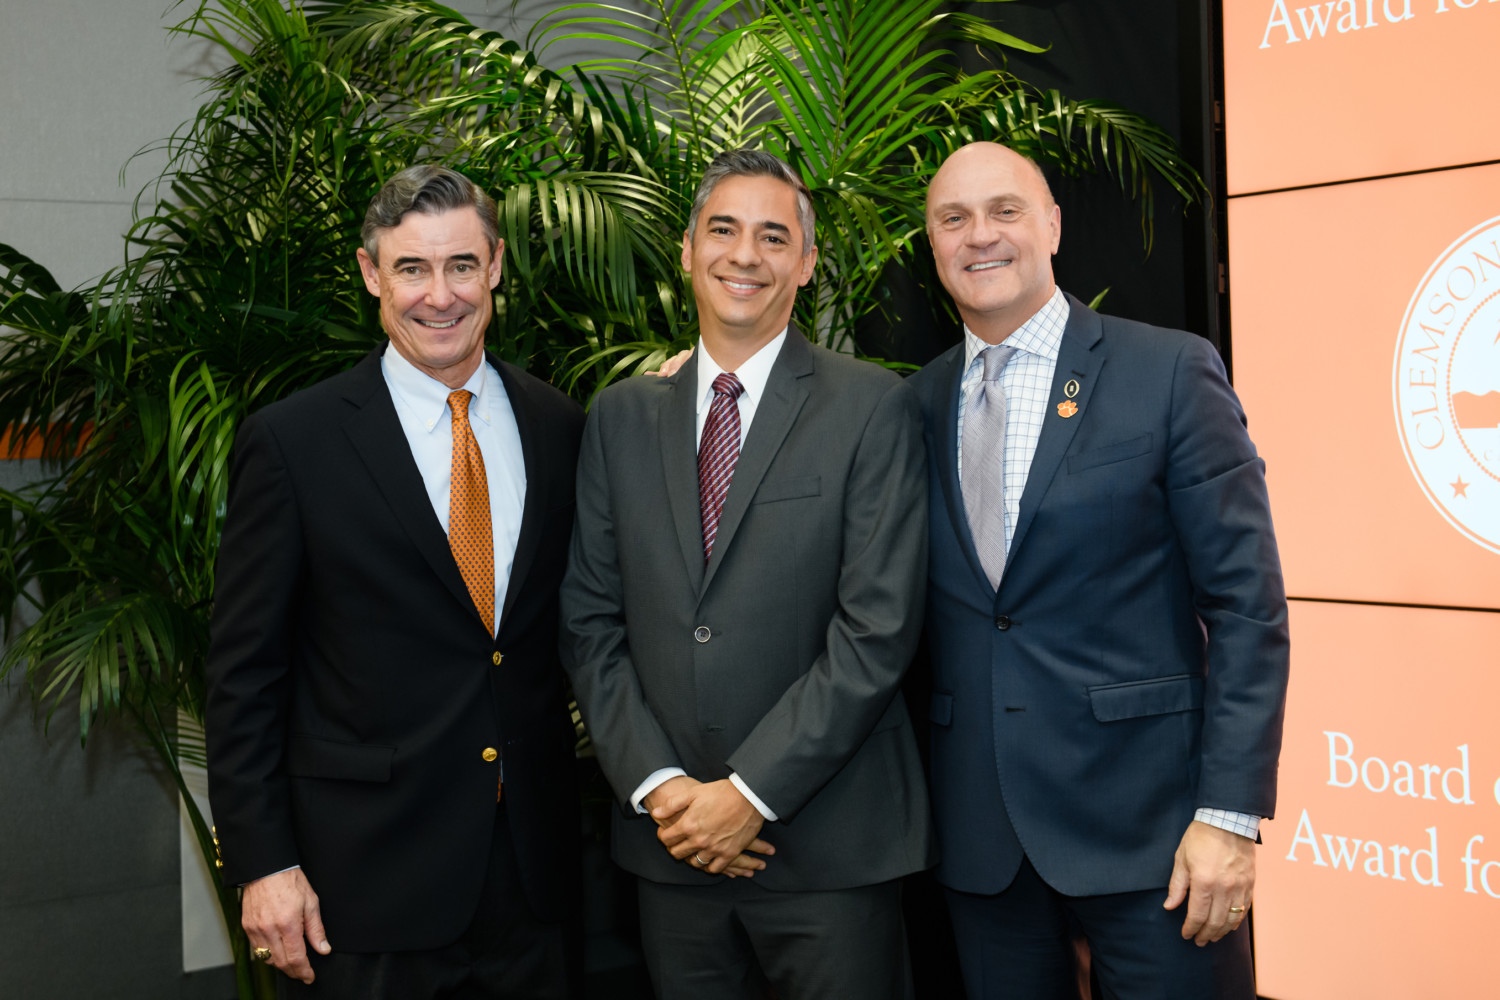 Hugo Sanabria (center) was joined by Board of Trustees chair Smyth McKissick and President Jim Clements as Sanabria received the Board of Trustees’ Award for Excellence.